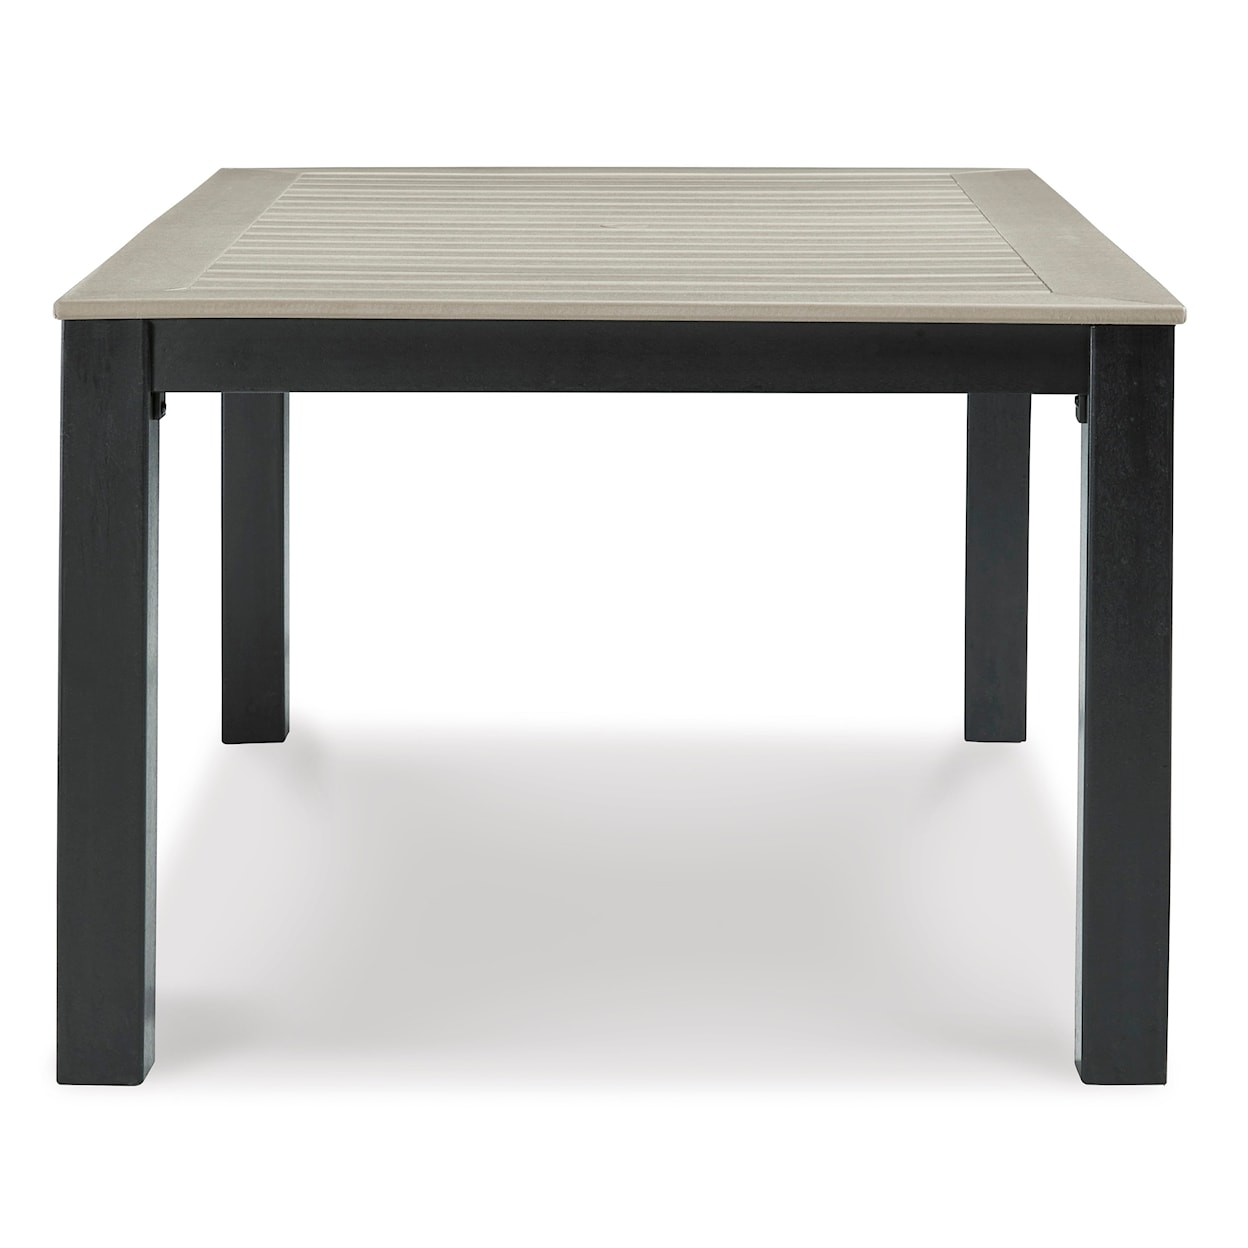 Ashley Furniture Signature Design Mount Valley Outdoor Dining Table